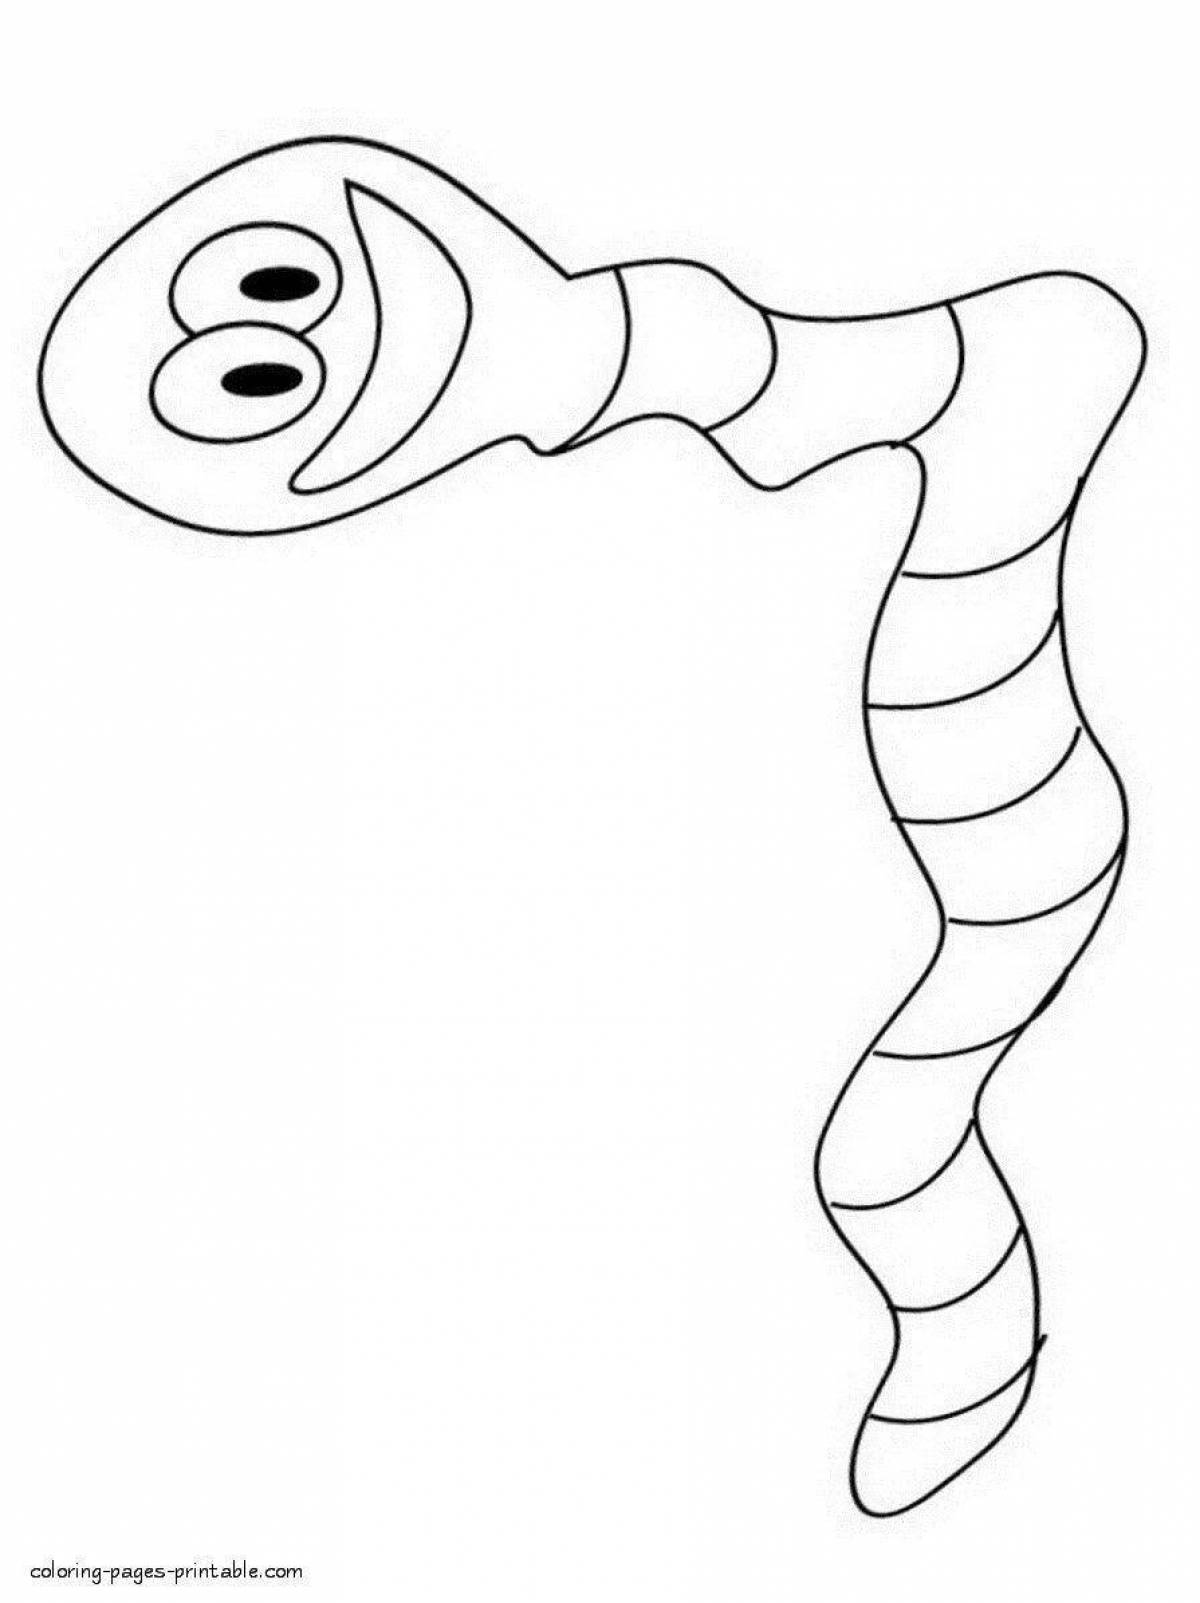 Magic worm coloring pages